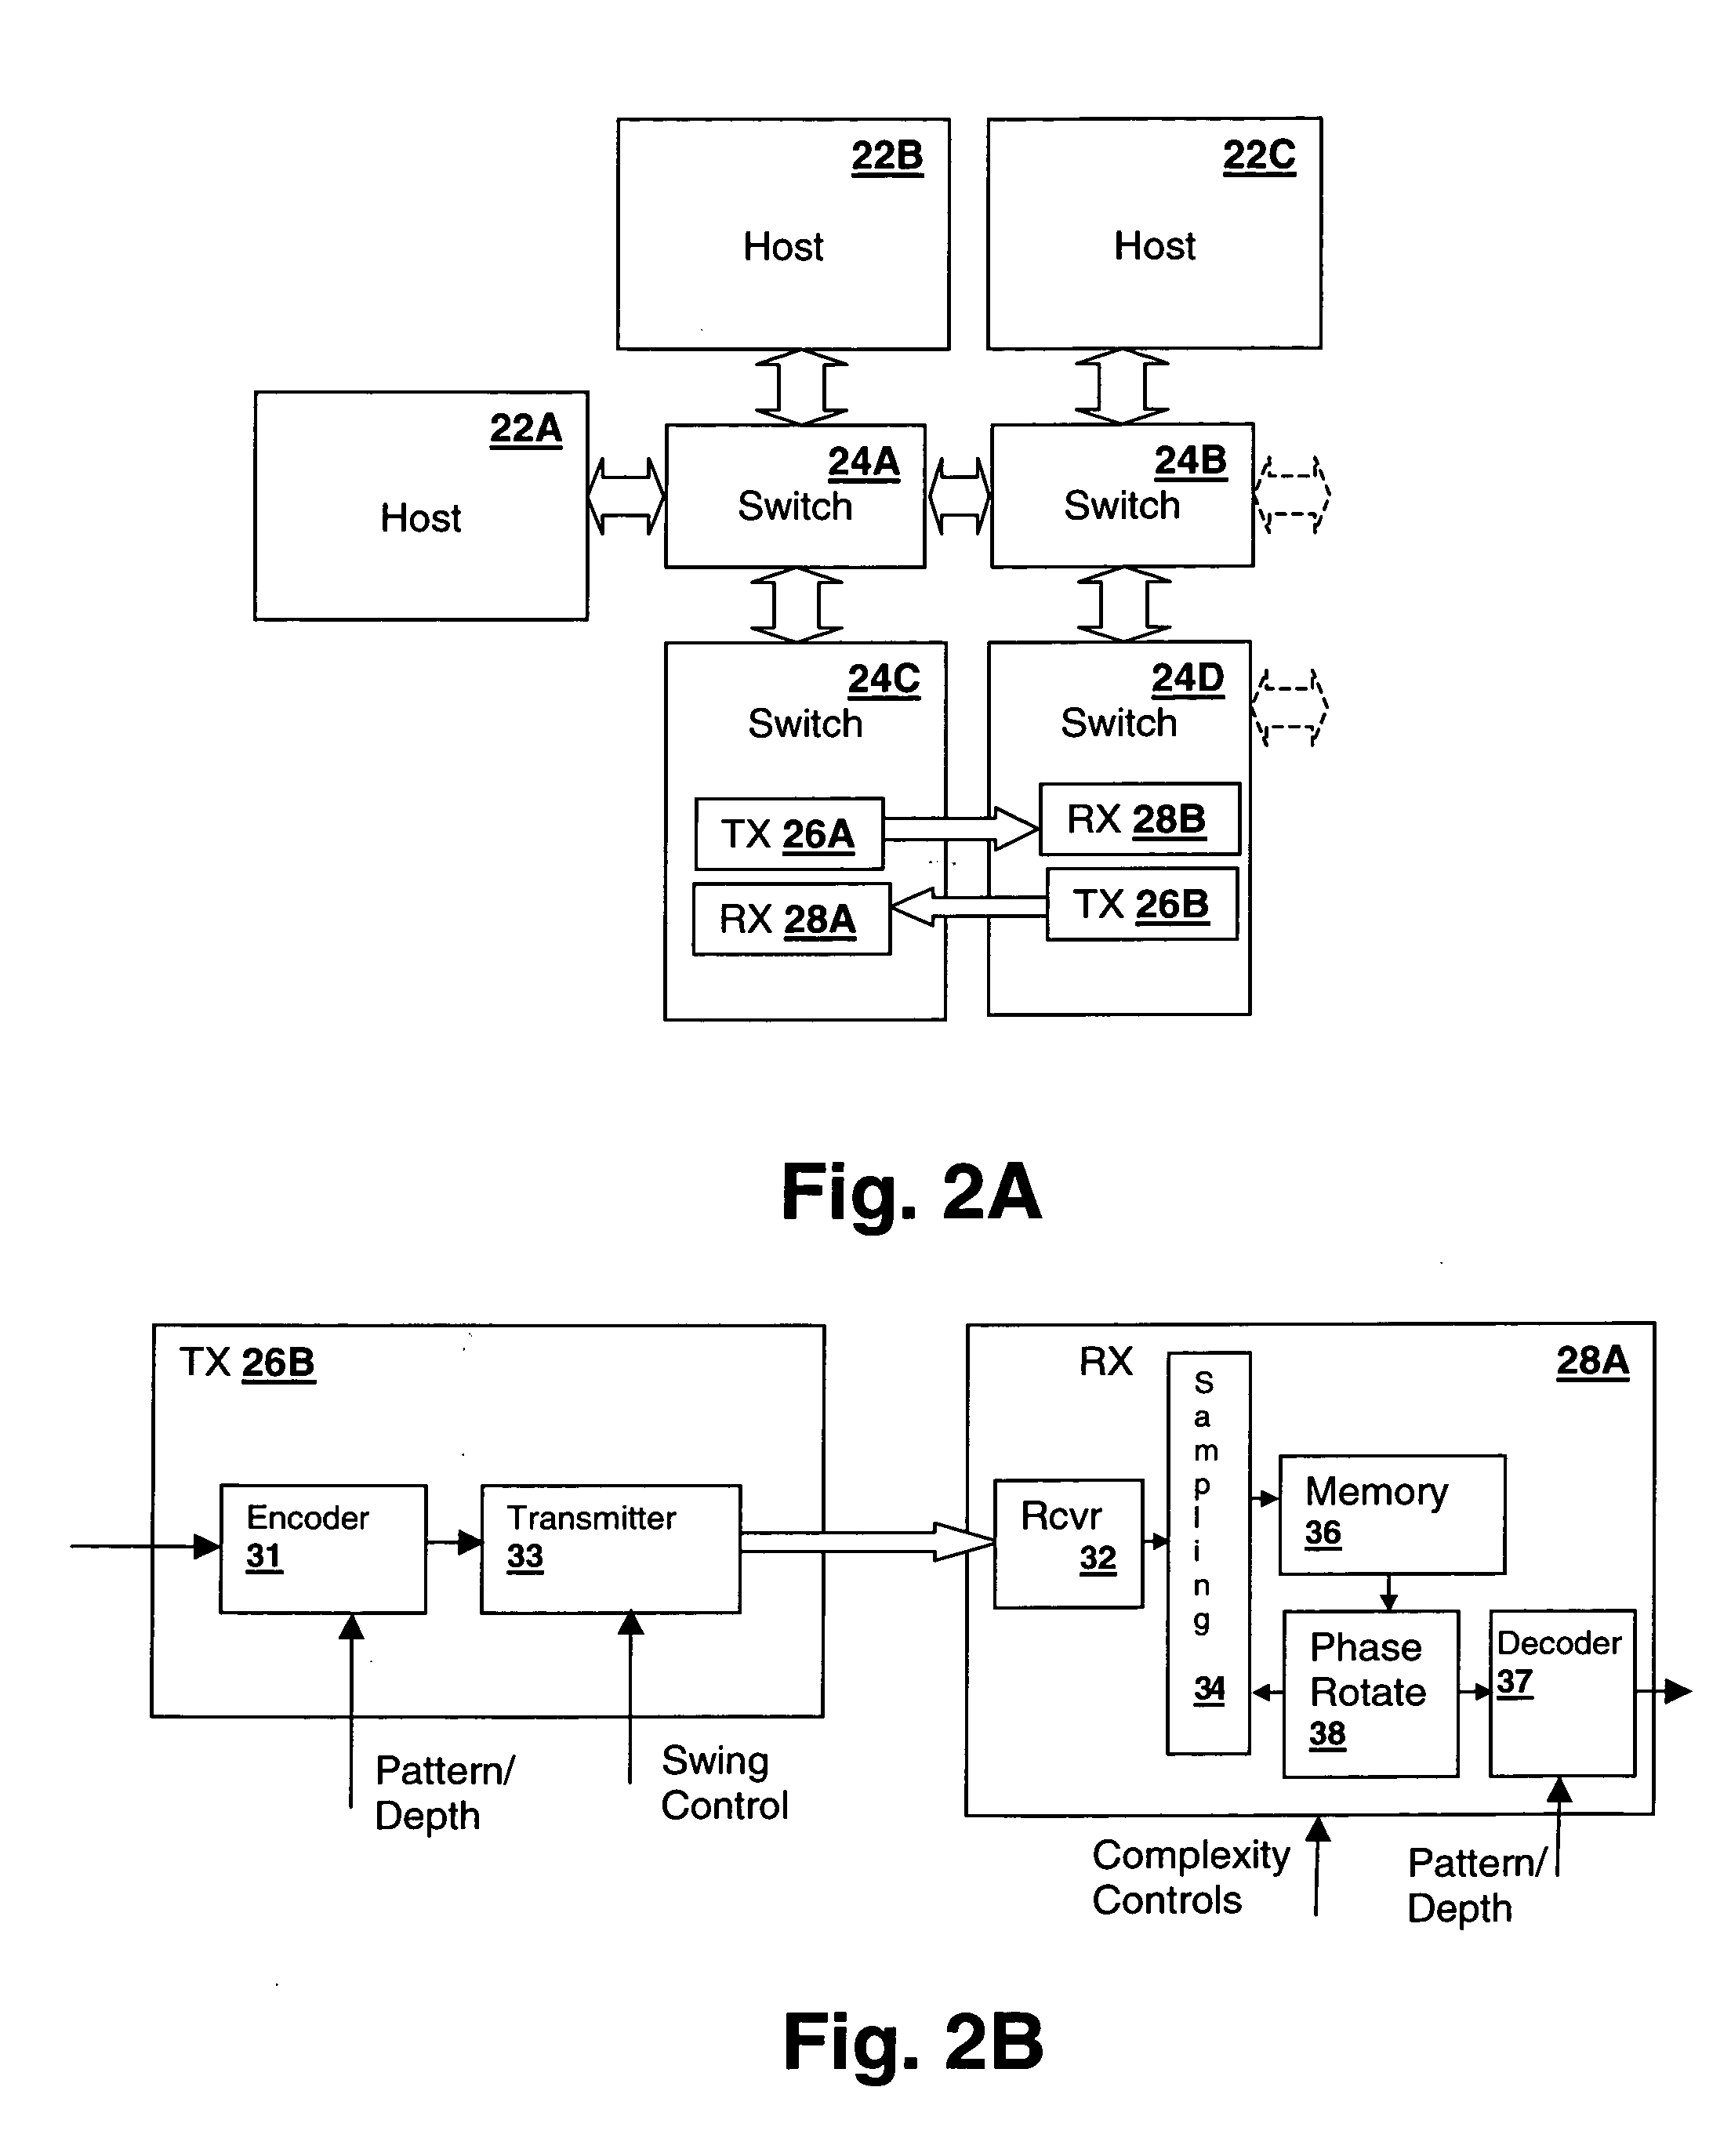 Method and system for interactive modeling of high-level network performance with low-level link design